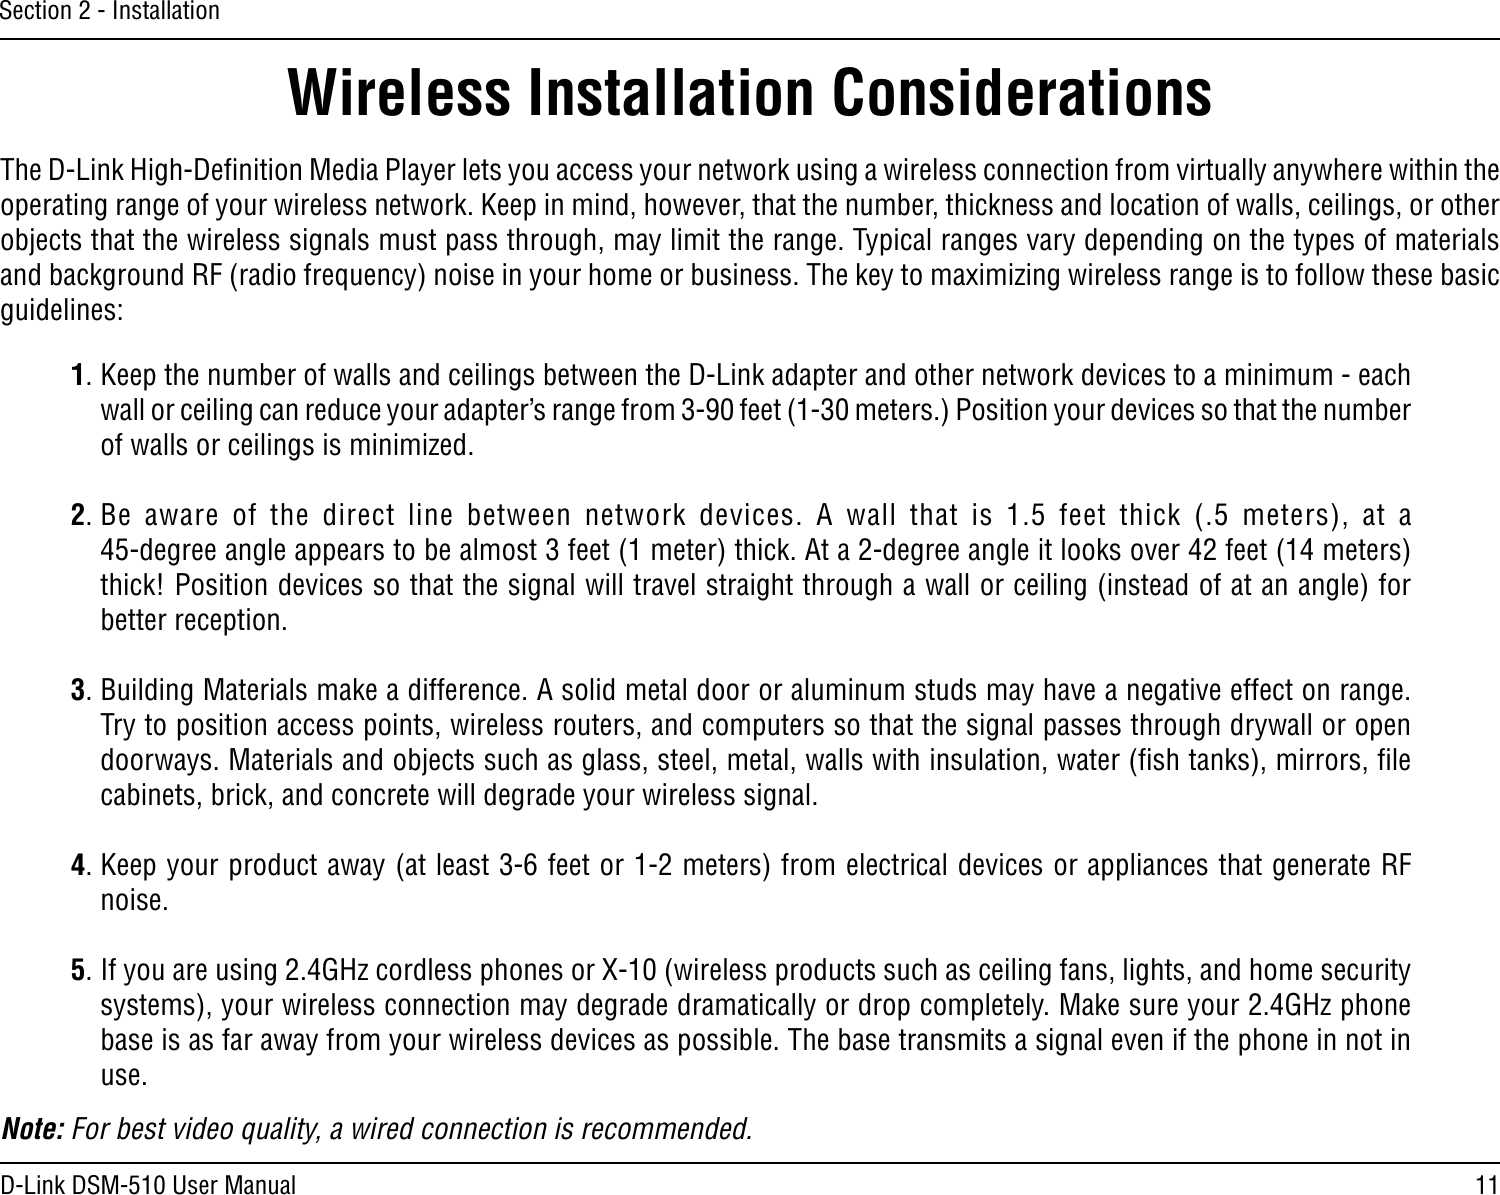 11D-Link DSM-510 User ManualSection 2 - InstallationWireless Installation ConsiderationsThe D-Link High-Deﬁnition Media Player lets you access your network using a wireless connection from virtually anywhere within the operating range of your wireless network. Keep in mind, however, that the number, thickness and location of walls, ceilings, or other objects that the wireless signals must pass through, may limit the range. Typical ranges vary depending on the types of materials and background RF (radio frequency) noise in your home or business. The key to maximizing wireless range is to follow these basic guidelines:1. Keep the number of walls and ceilings between the D-Link adapter and other network devices to a minimum - each wall or ceiling can reduce your adapter’s range from 3-90 feet (1-30 meters.) Position your devices so that the number of walls or ceilings is minimized.2. Be  aware  of  the  direct  line  between  network  devices.  A  wall  that  is  1.5  feet  thick  (.5  meters),  at  a  45-degree angle appears to be almost 3 feet (1 meter) thick. At a 2-degree angle it looks over 42 feet (14 meters) thick! Position devices so that the signal will travel straight through a wall or ceiling (instead of at an angle) for better reception.3. Building Materials make a difference. A solid metal door or aluminum studs may have a negative effect on range. Try to position access points, wireless routers, and computers so that the signal passes through drywall or open doorways. Materials and objects such as glass, steel, metal, walls with insulation, water (ﬁsh tanks), mirrors, ﬁle cabinets, brick, and concrete will degrade your wireless signal.4. Keep your product away (at least 3-6 feet or 1-2 meters) from electrical devices or appliances that generate RF noise.5. If you are using 2.4GHz cordless phones or X-10 (wireless products such as ceiling fans, lights, and home security systems), your wireless connection may degrade dramatically or drop completely. Make sure your 2.4GHz phone base is as far away from your wireless devices as possible. The base transmits a signal even if the phone in not in use.Note: For best video quality, a wired connection is recommended. 